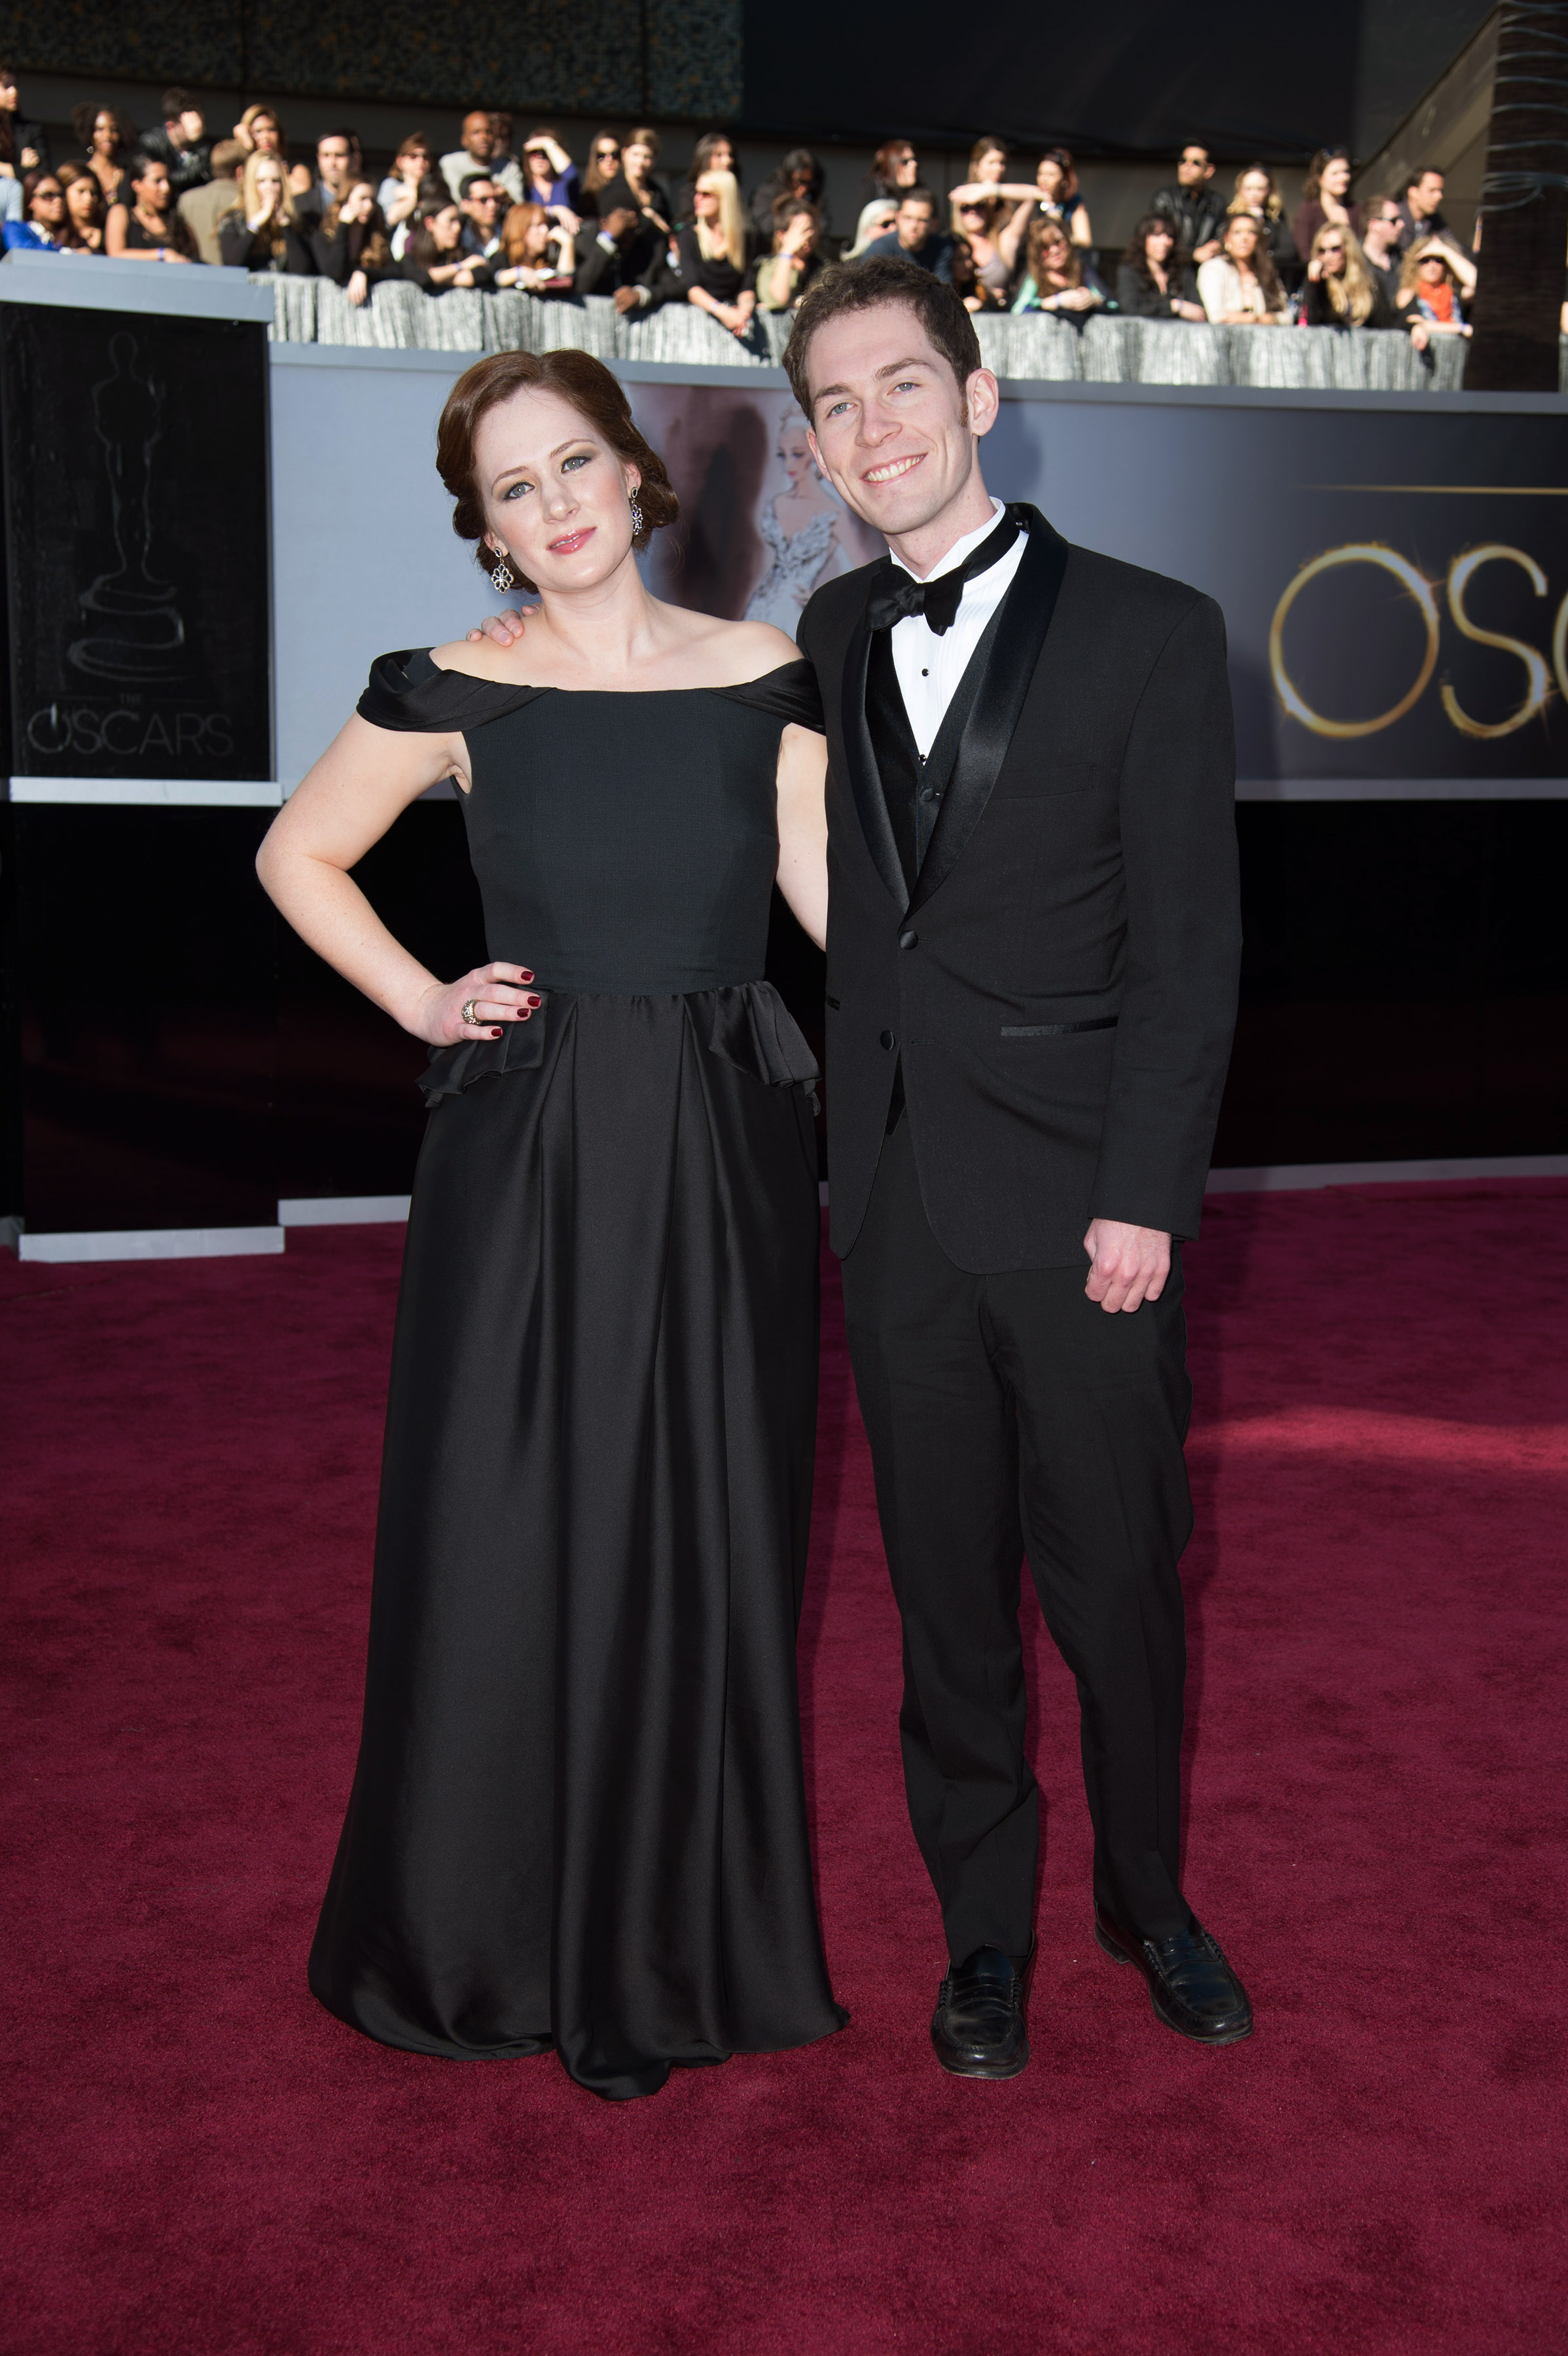 Fodhla Cronin O'Reilly and Timothy Reckart arrive at the 85th Academy Awards.